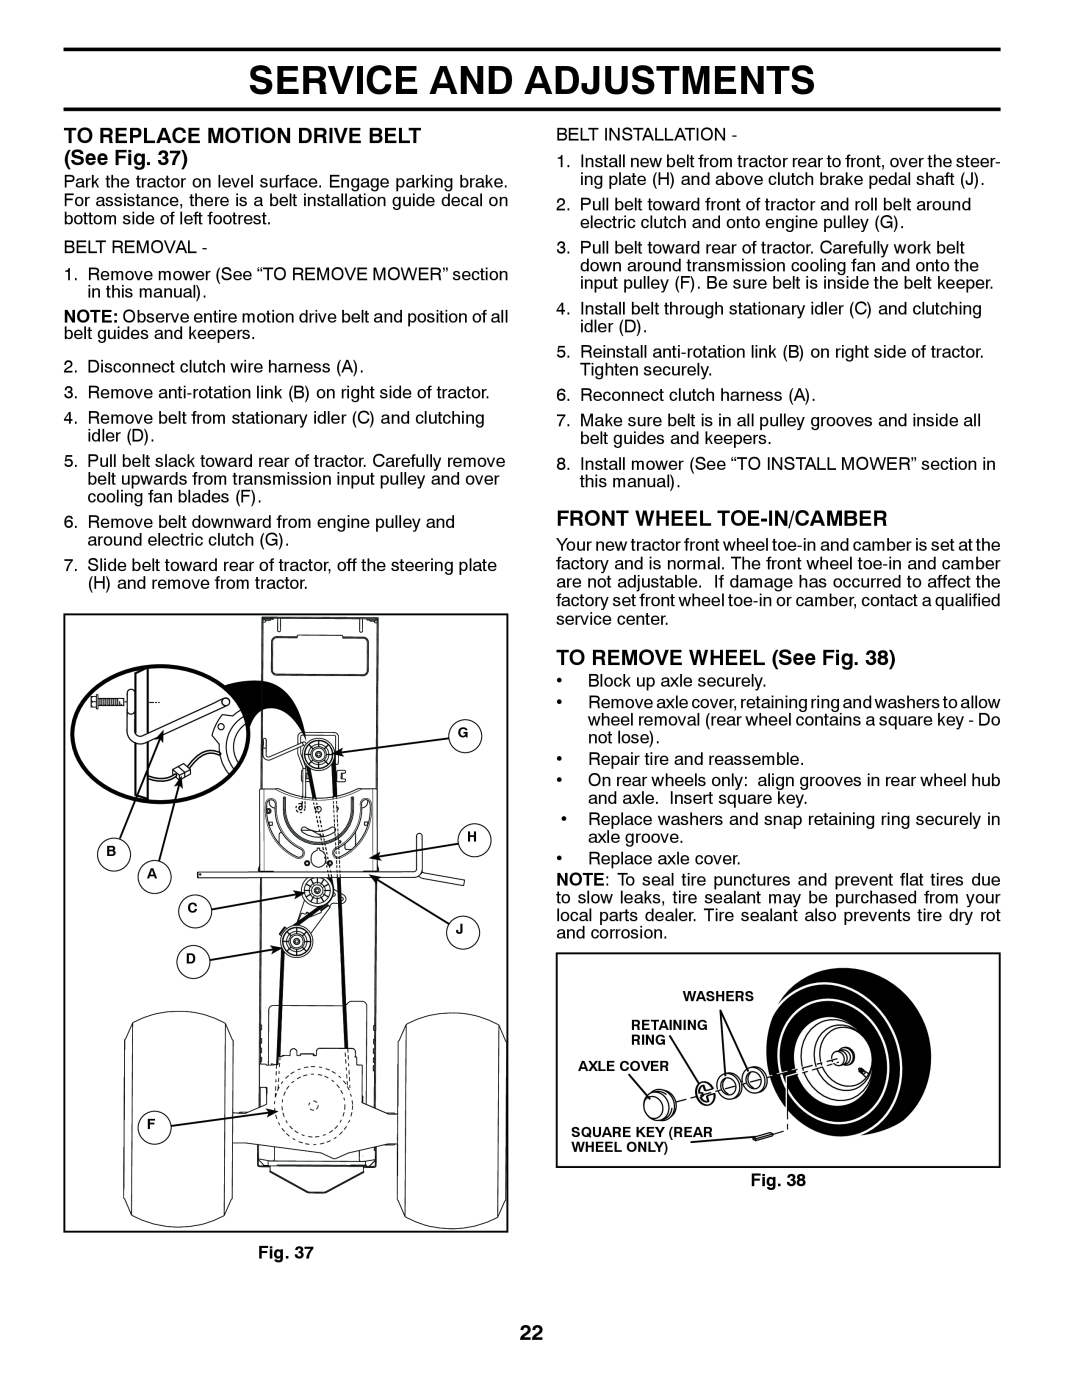 Husqvarna GTH27V48LS owner manual TO REPLACE MOTION DRIVE BELT See Fig, Front Wheel Toe-In/Camber, TO REMOVE WHEEL See Fig 